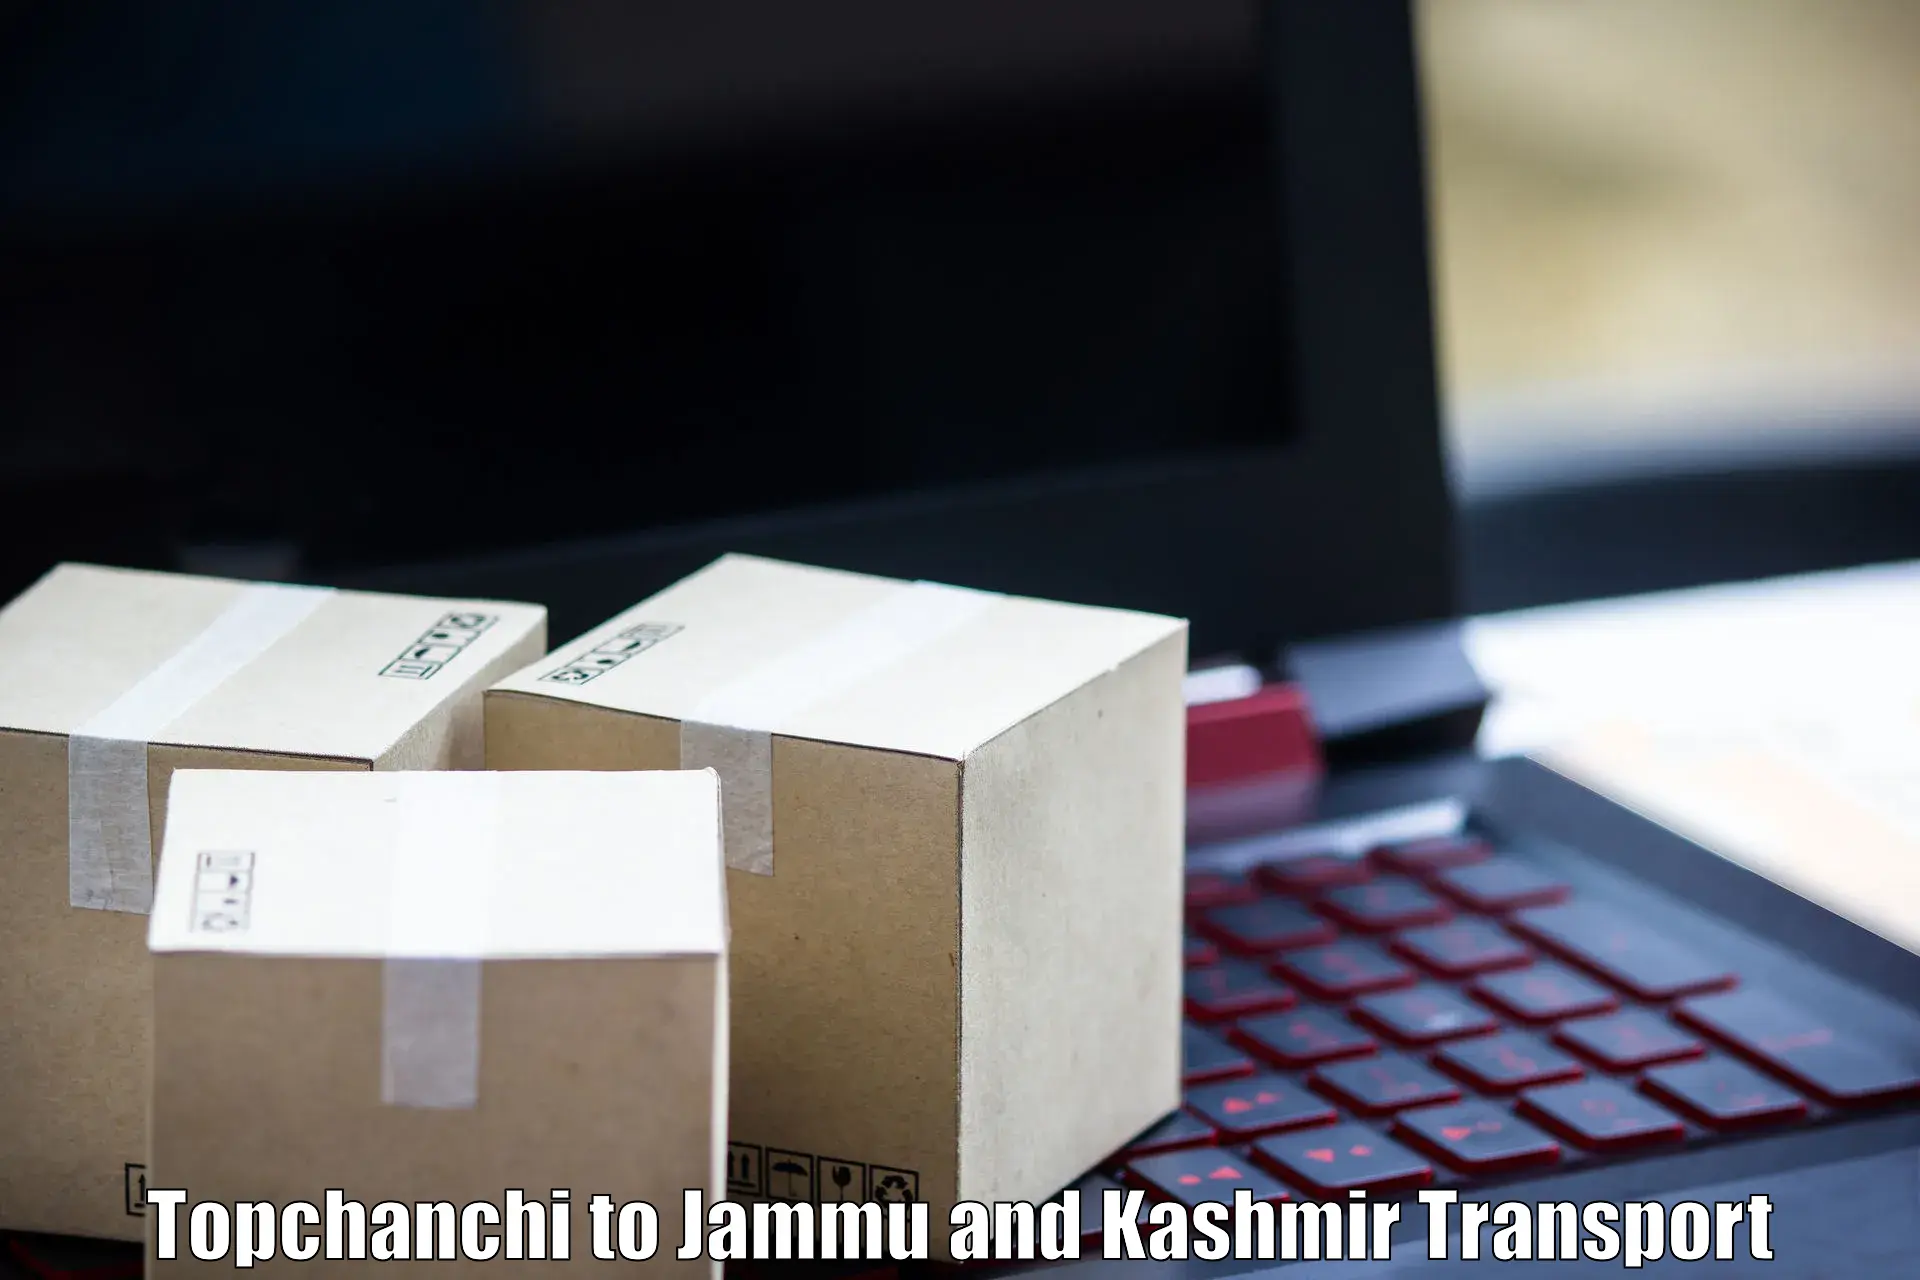 Pick up transport service in Topchanchi to Baramulla